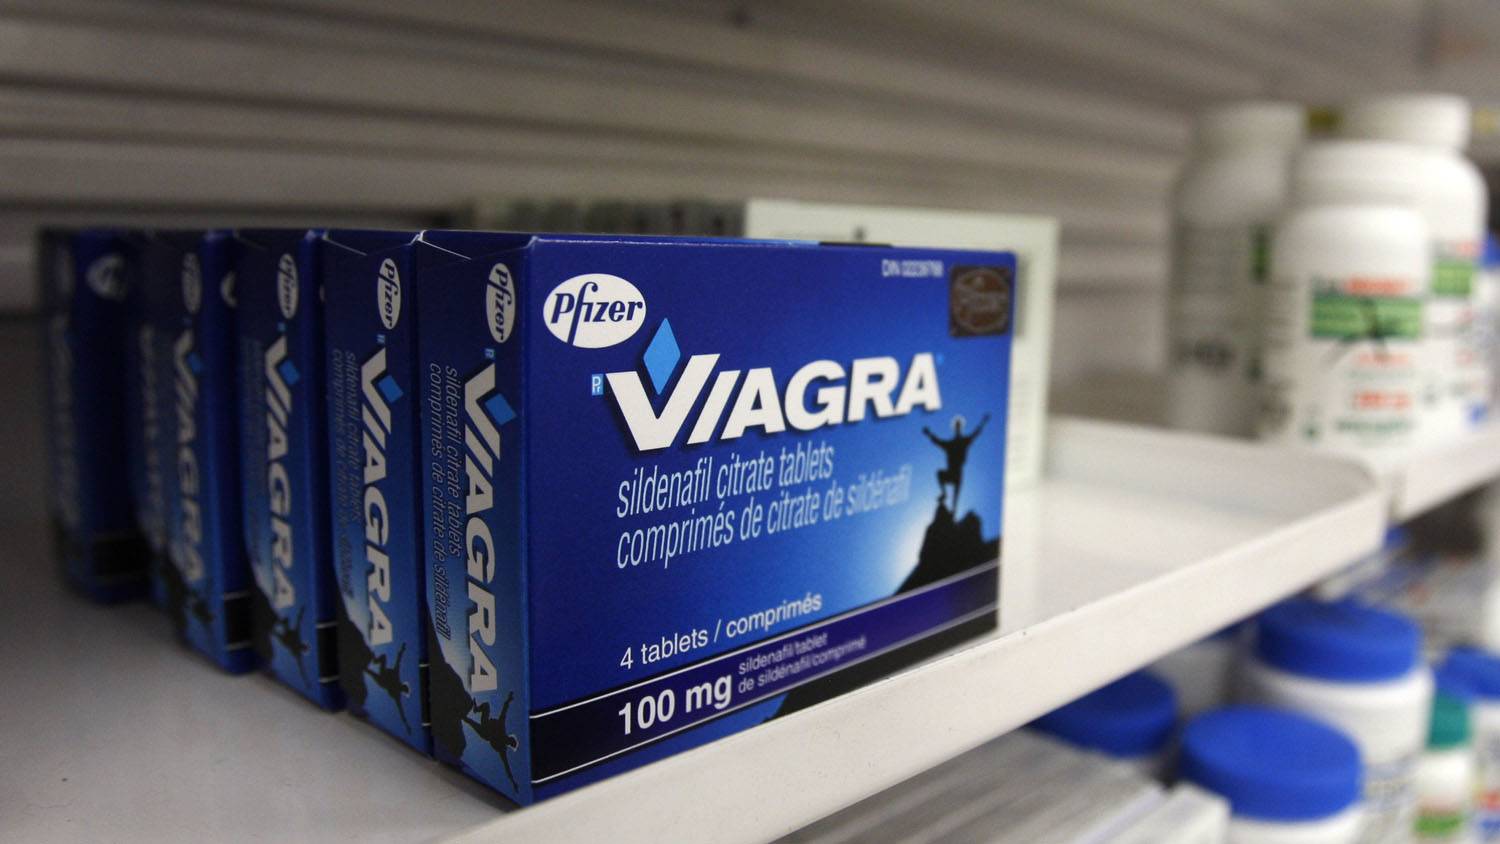 Our sex life is great, so why does he want to take Viagra?